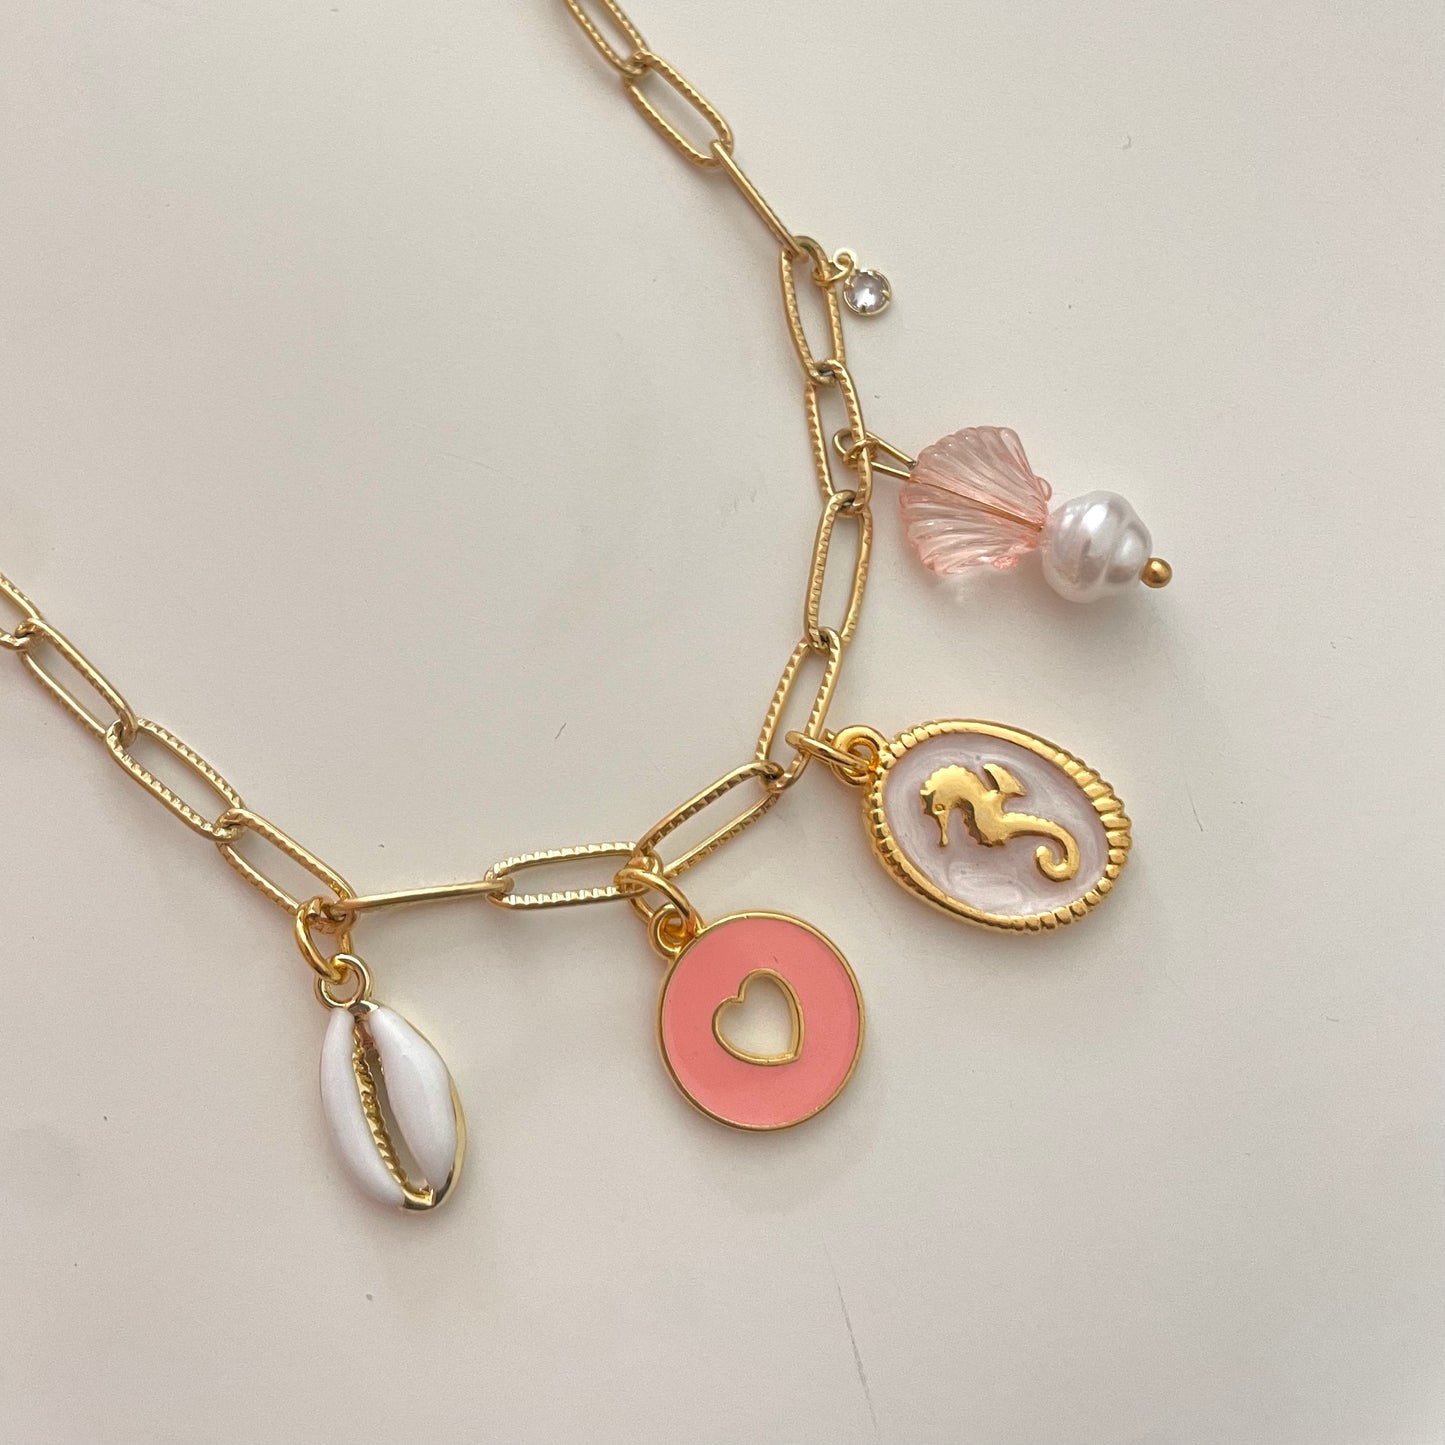 Charm necklace 12.0